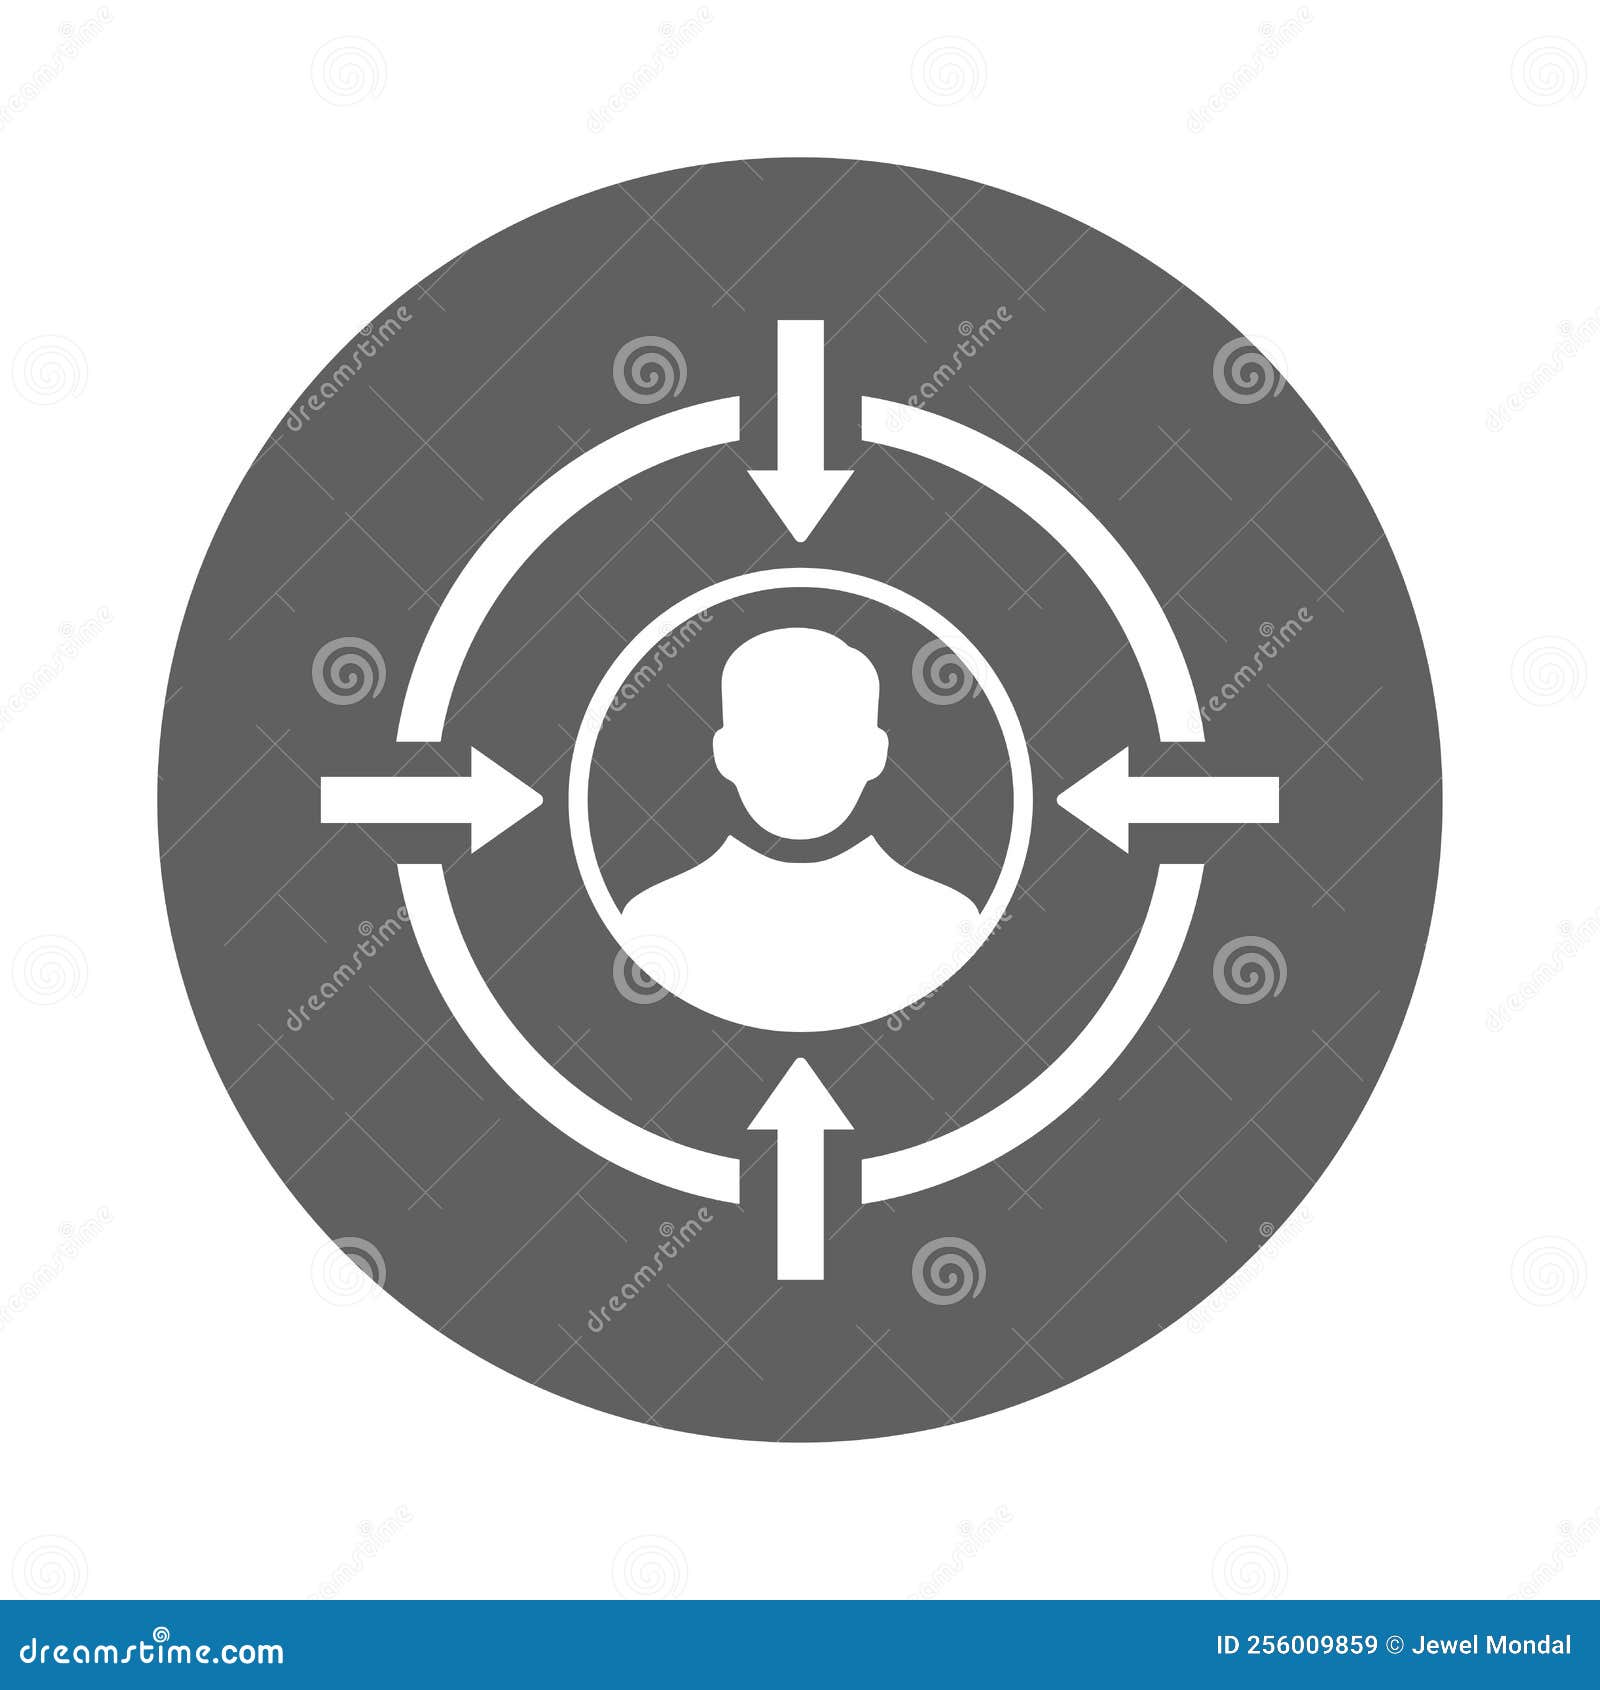 Businessman, employee, target icon. Gray vector graphics. Businessman, employee, target icon. Well organized simple vector. Use for commercial purposes, web, printing, or any type of design projects